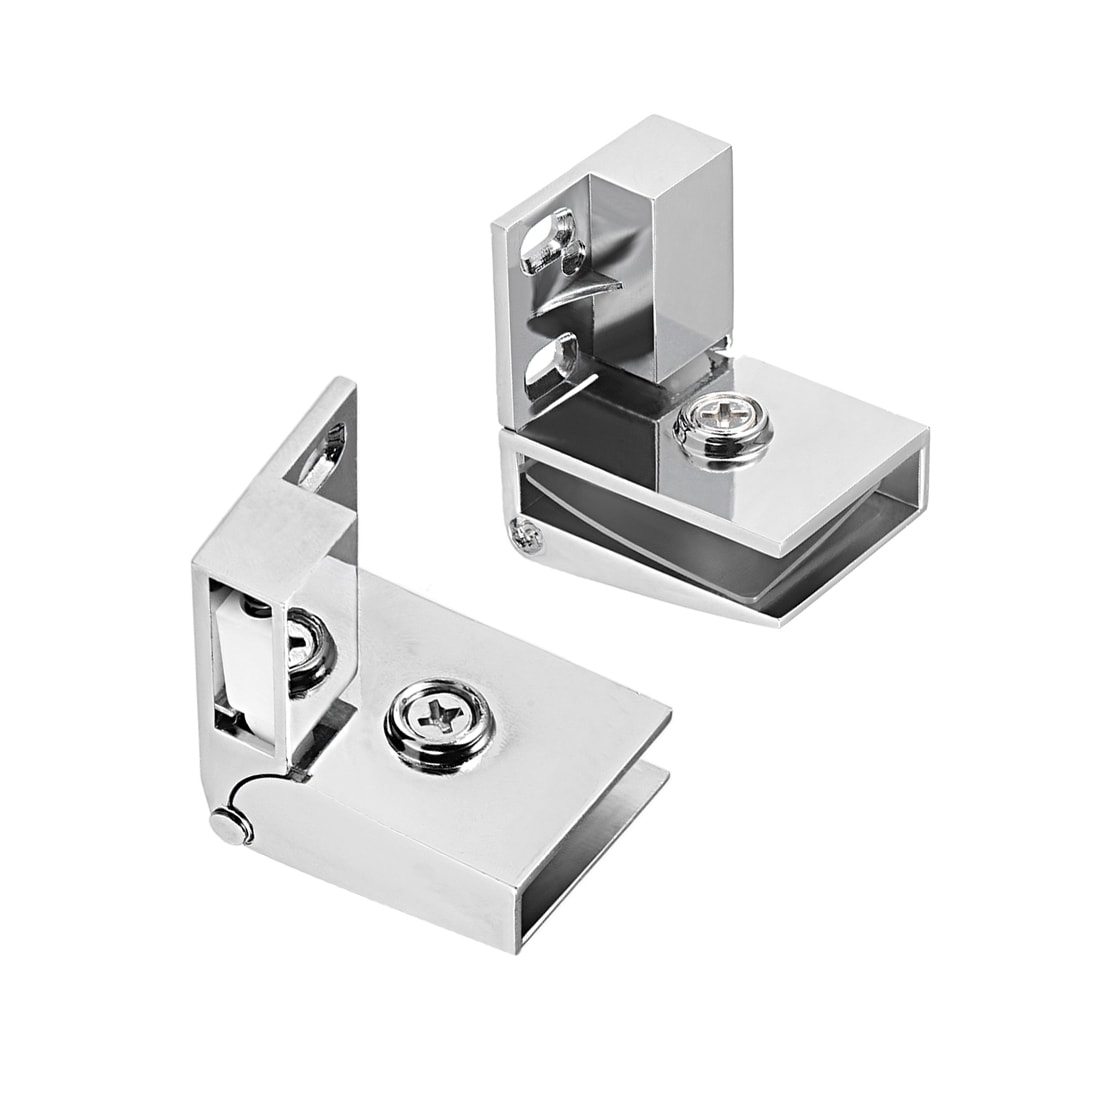 Glass Door Cabinet Door Hinge Glass Clamp,for 3-5mm Glass Thickness 2Pair - Silver - Type 1, 2 Pair